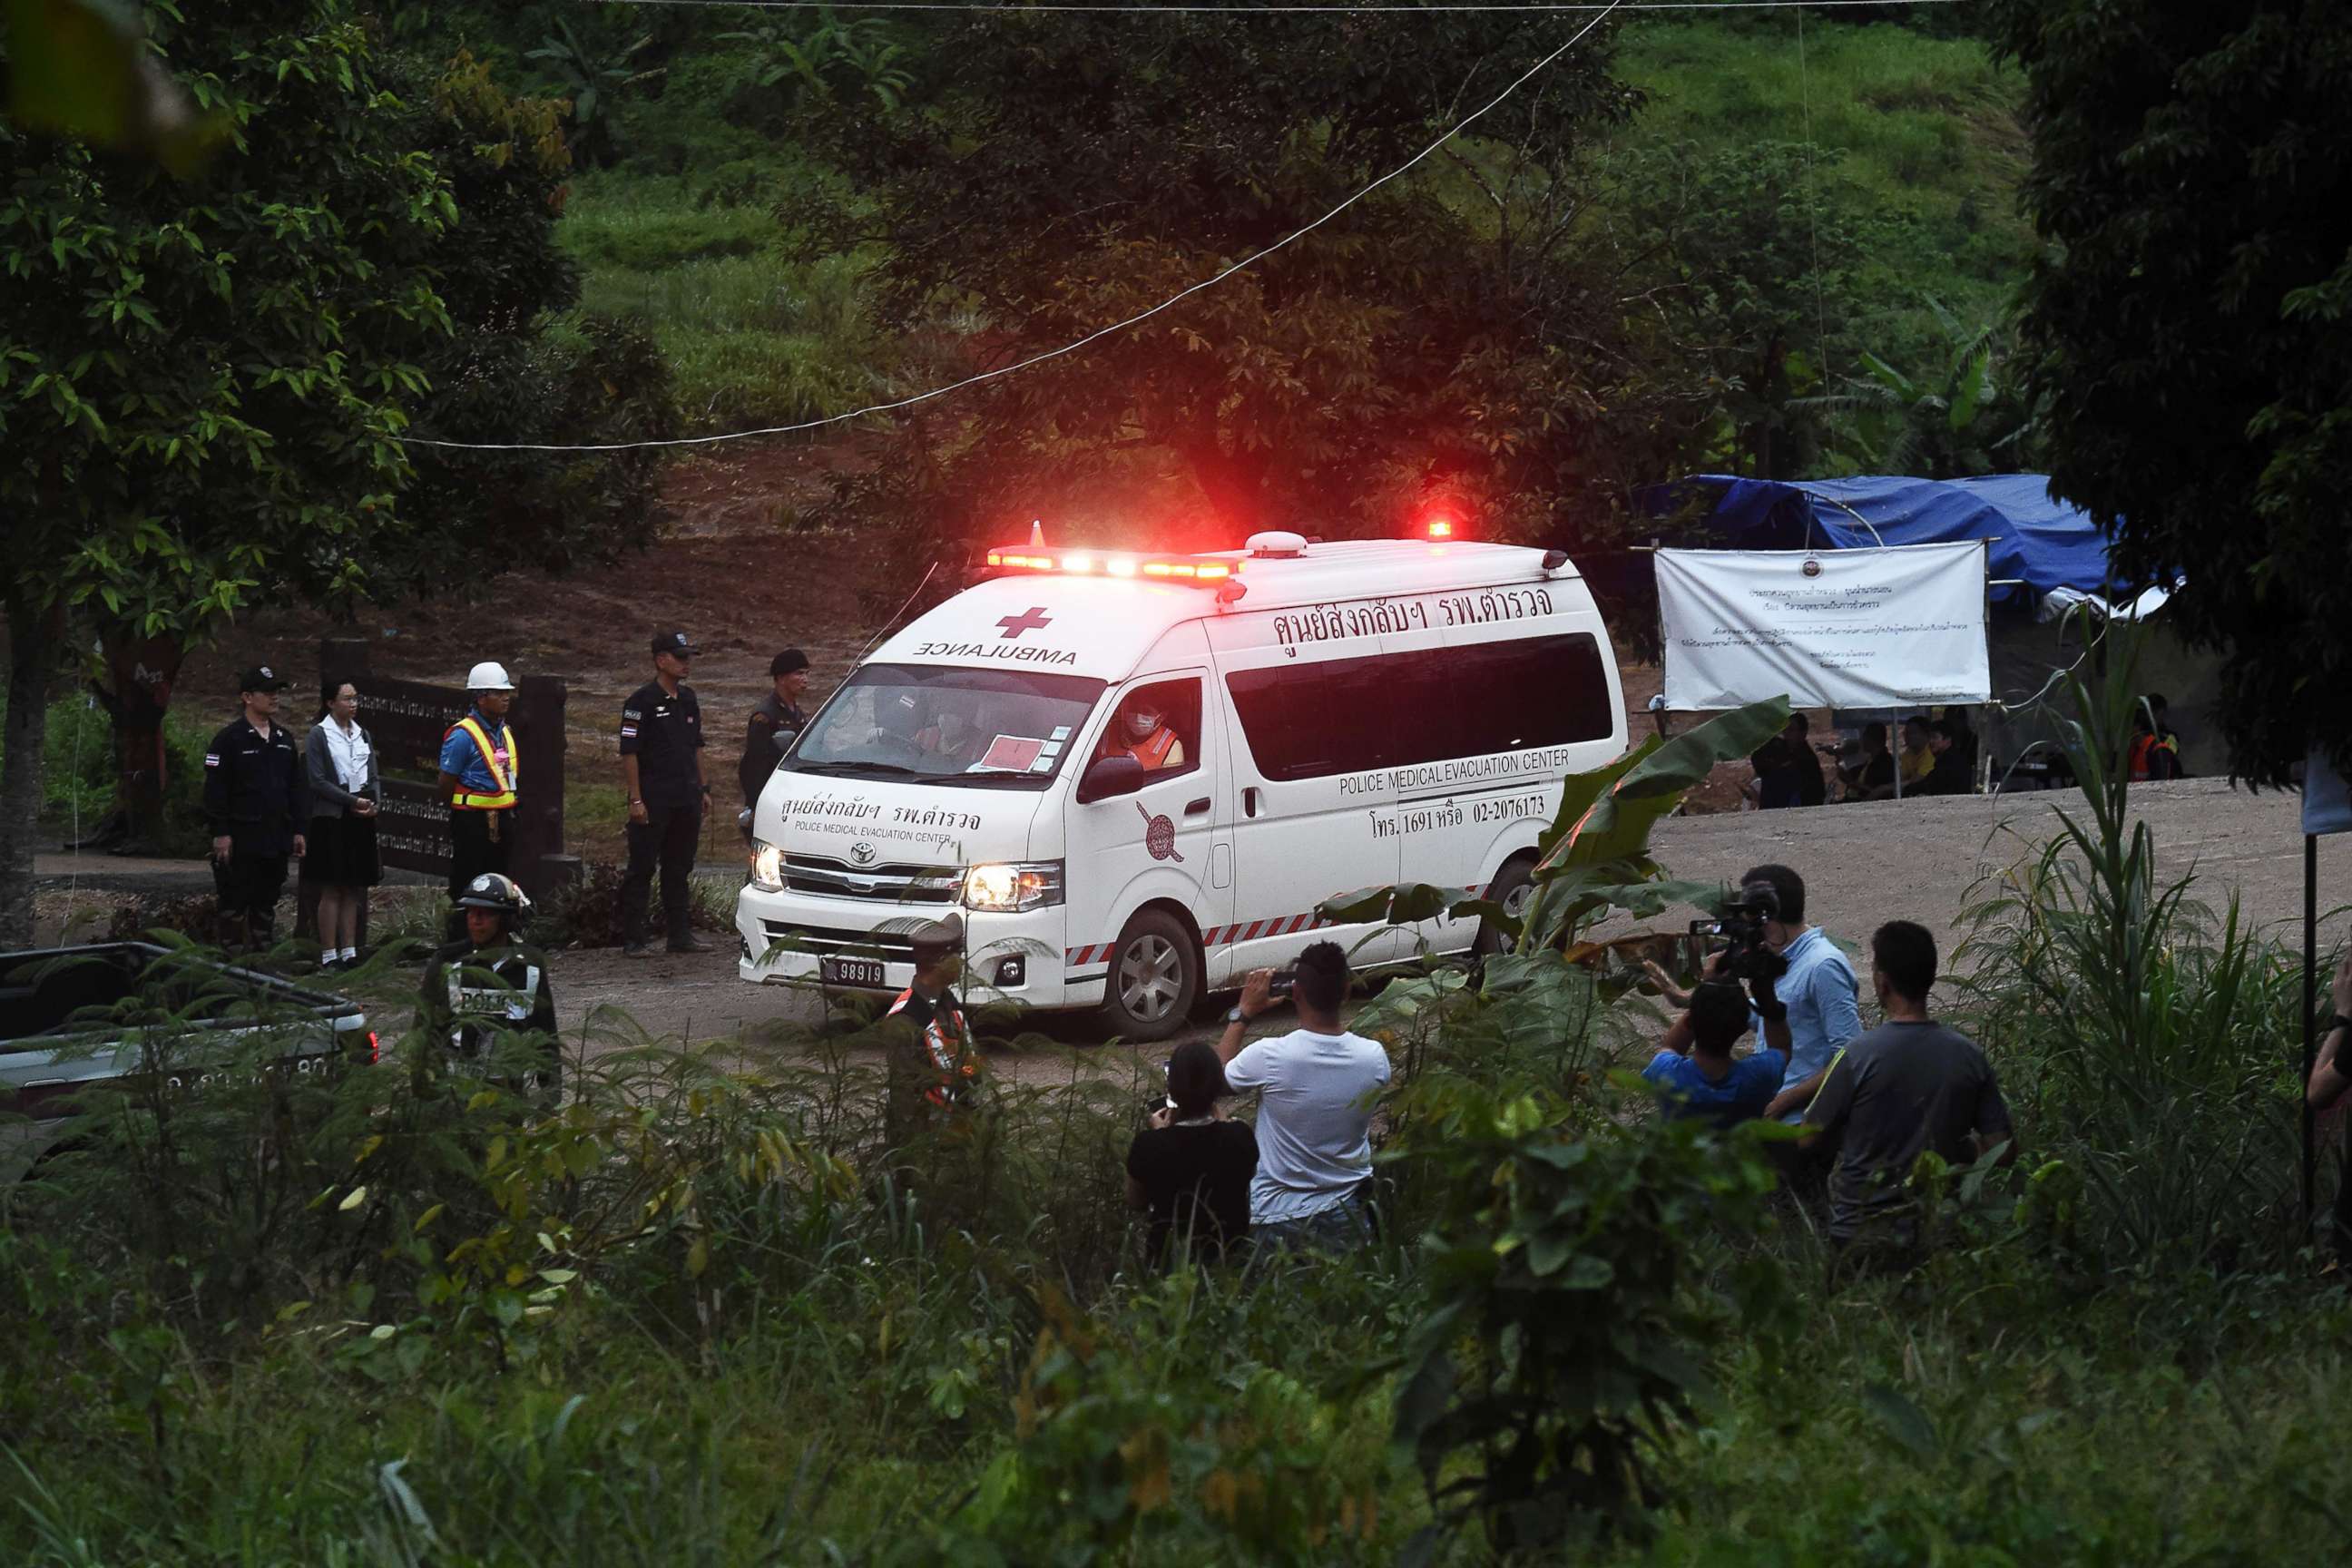 PHOTO: An ambulance leaves the Tham Luang cave area after divers evacuated some of the 12 boys and their coach trapped at the cave in Khun Nam Nang Non Forest Park in the Mae Sai district of Chiang Rai province on July 8, 2018 in Thailand.